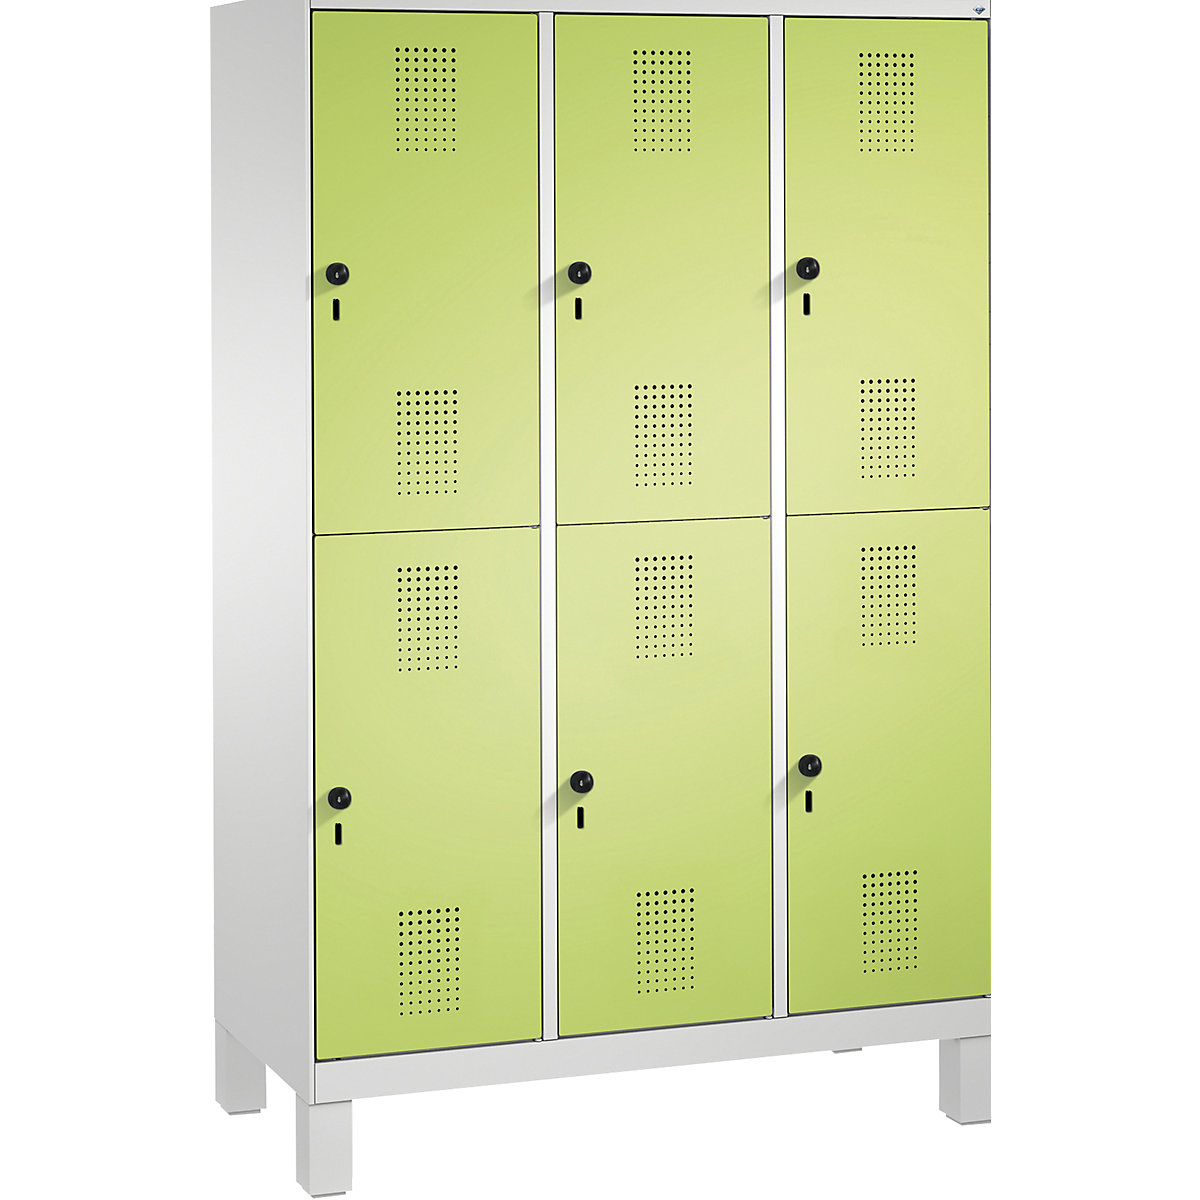 EVOLO cloakroom locker, double tier, with feet – C+P, 3 compartments, 2 shelf compartments each, compartment width 400 mm, light grey / viridian green-8